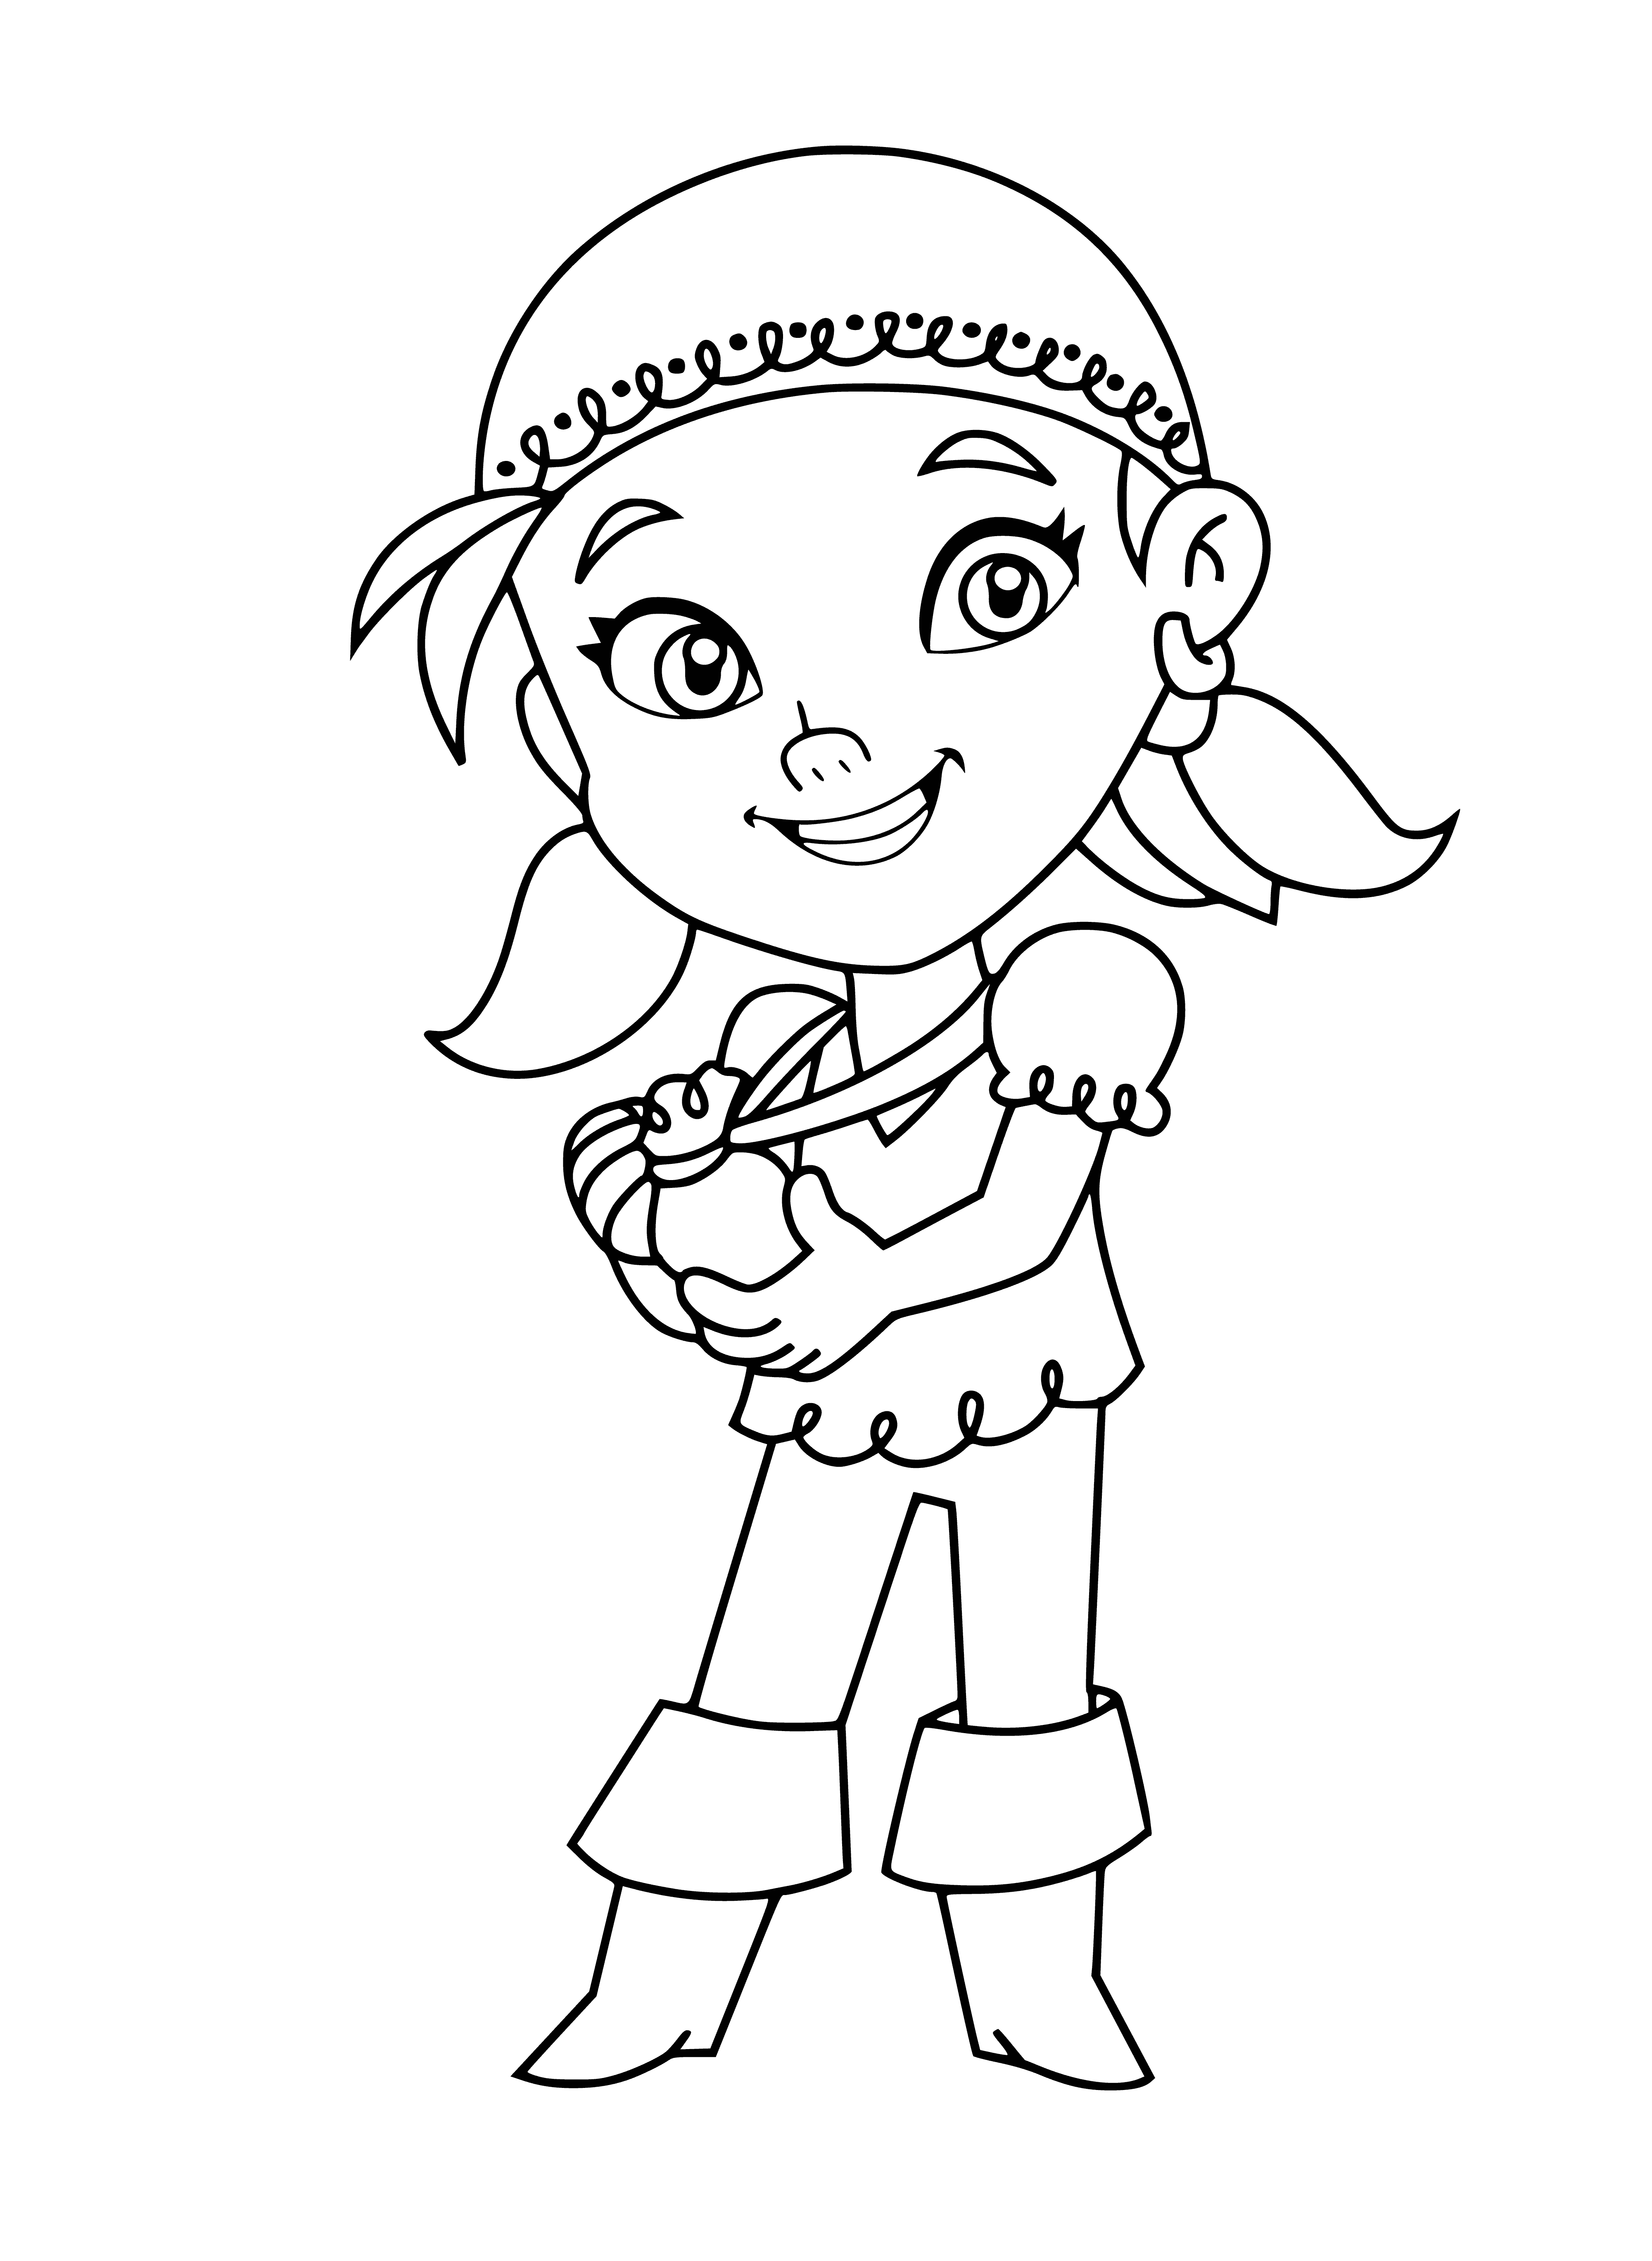 Izzy and the Fairy Dust coloring page